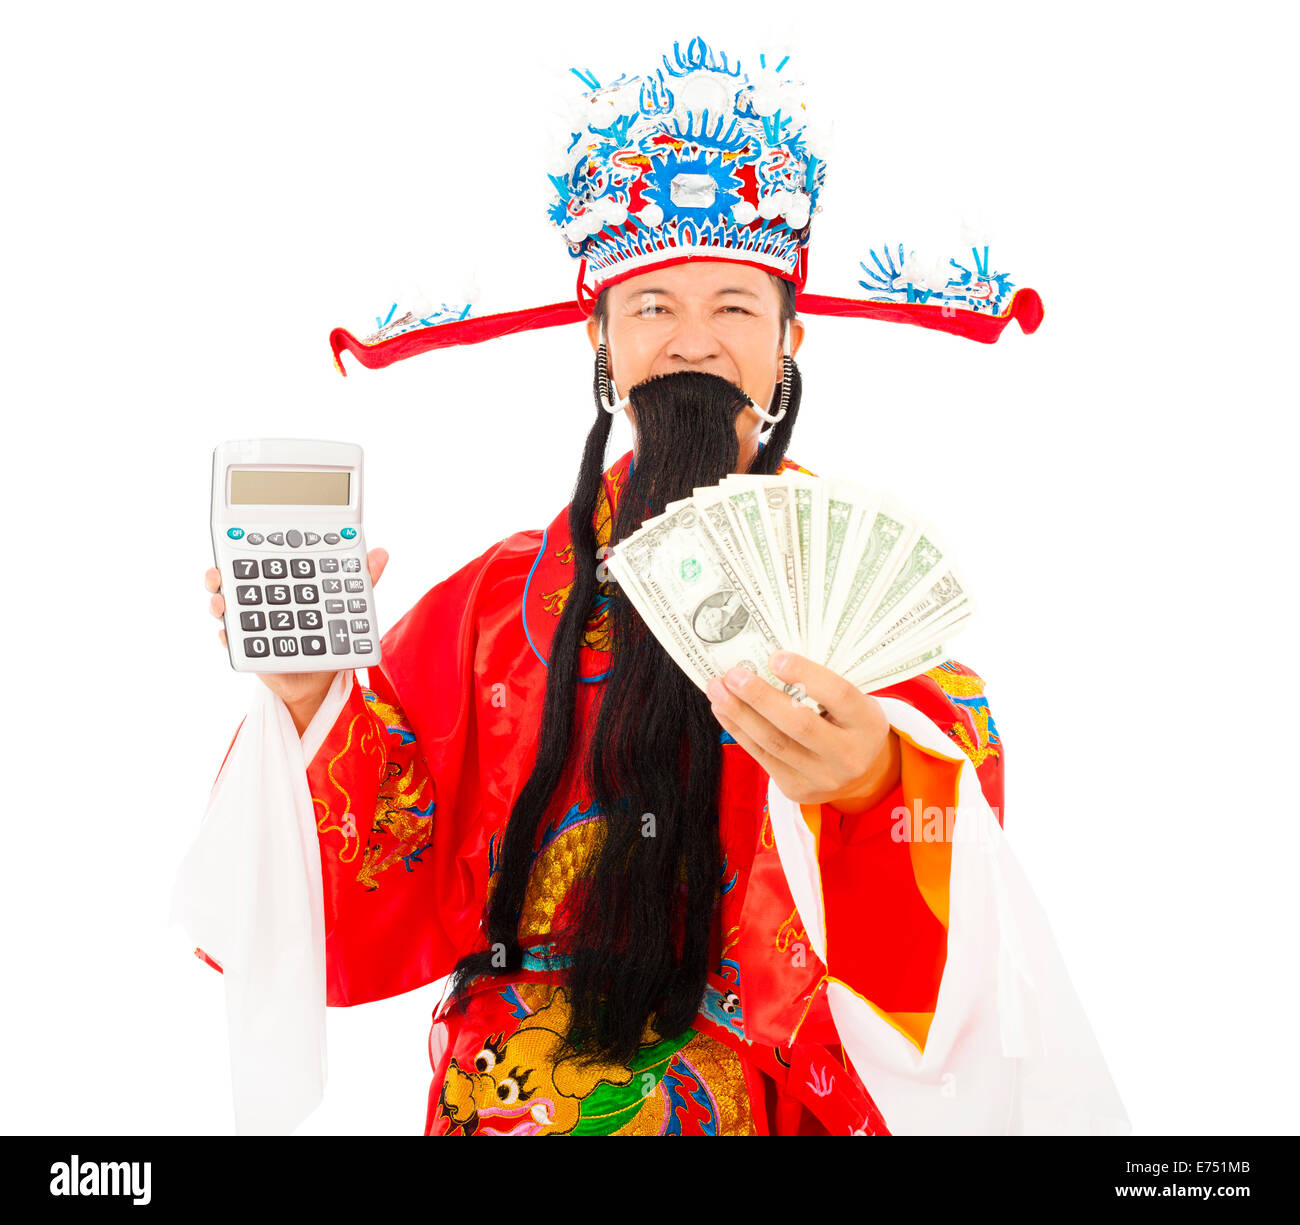 God of wealth holding a compute machine and money Stock Photo